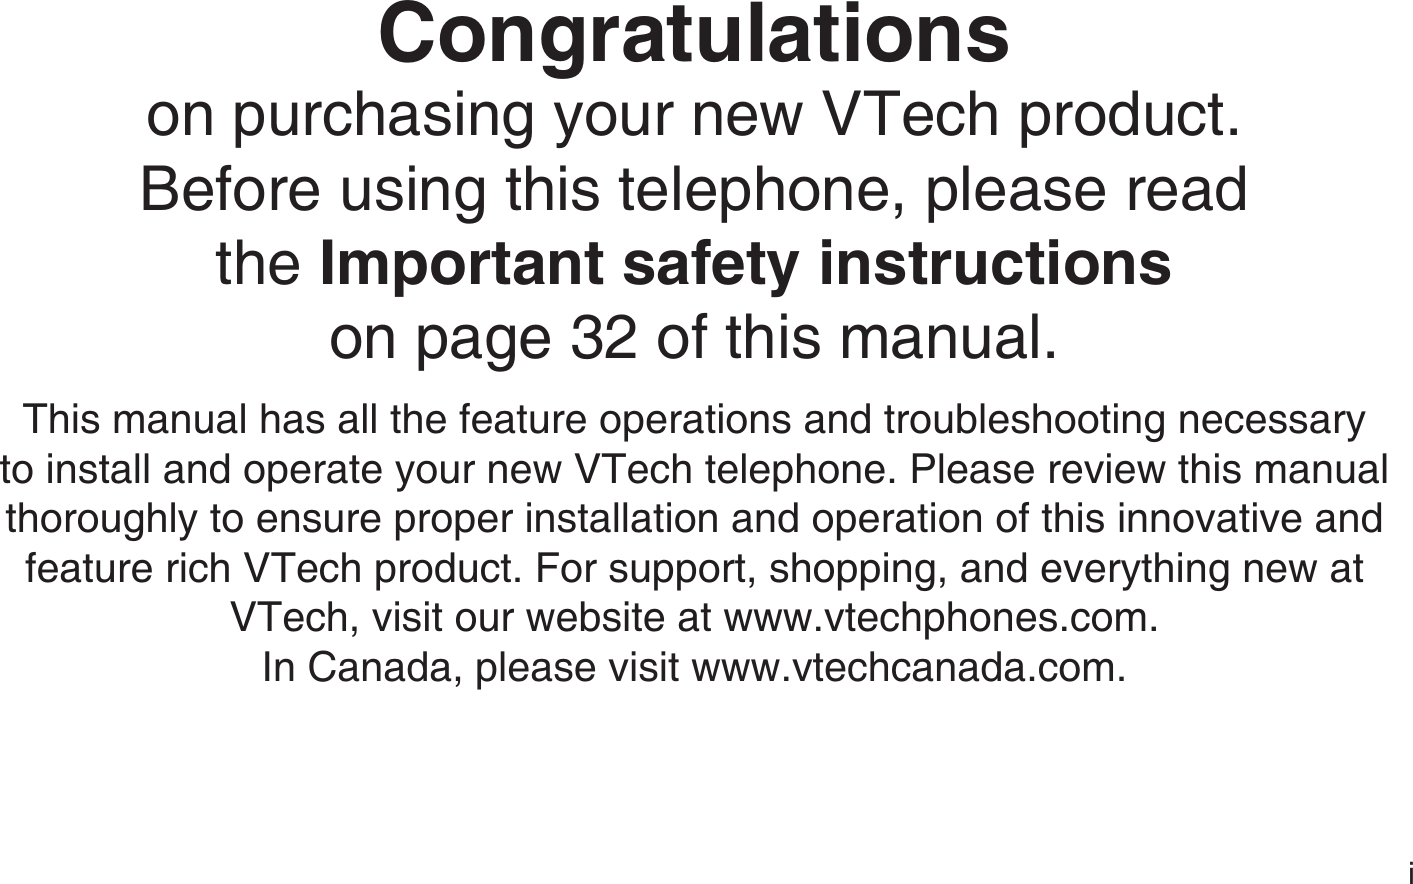 iCongratulationson purchasing your new VTech product.Before using this telephone, please read the Important safety instructionson page 32 of this manual.This manual has all the feature operations and troubleshooting necessary to install and operate your new VTech telephone. Please review this manual thoroughly to ensure proper installation and operation of this innovative and feature rich VTech product. For support, shopping, and everything new at VTech, visit our website at www.vtechphones.com. In Canada, please visit www.vtechcanada.com.